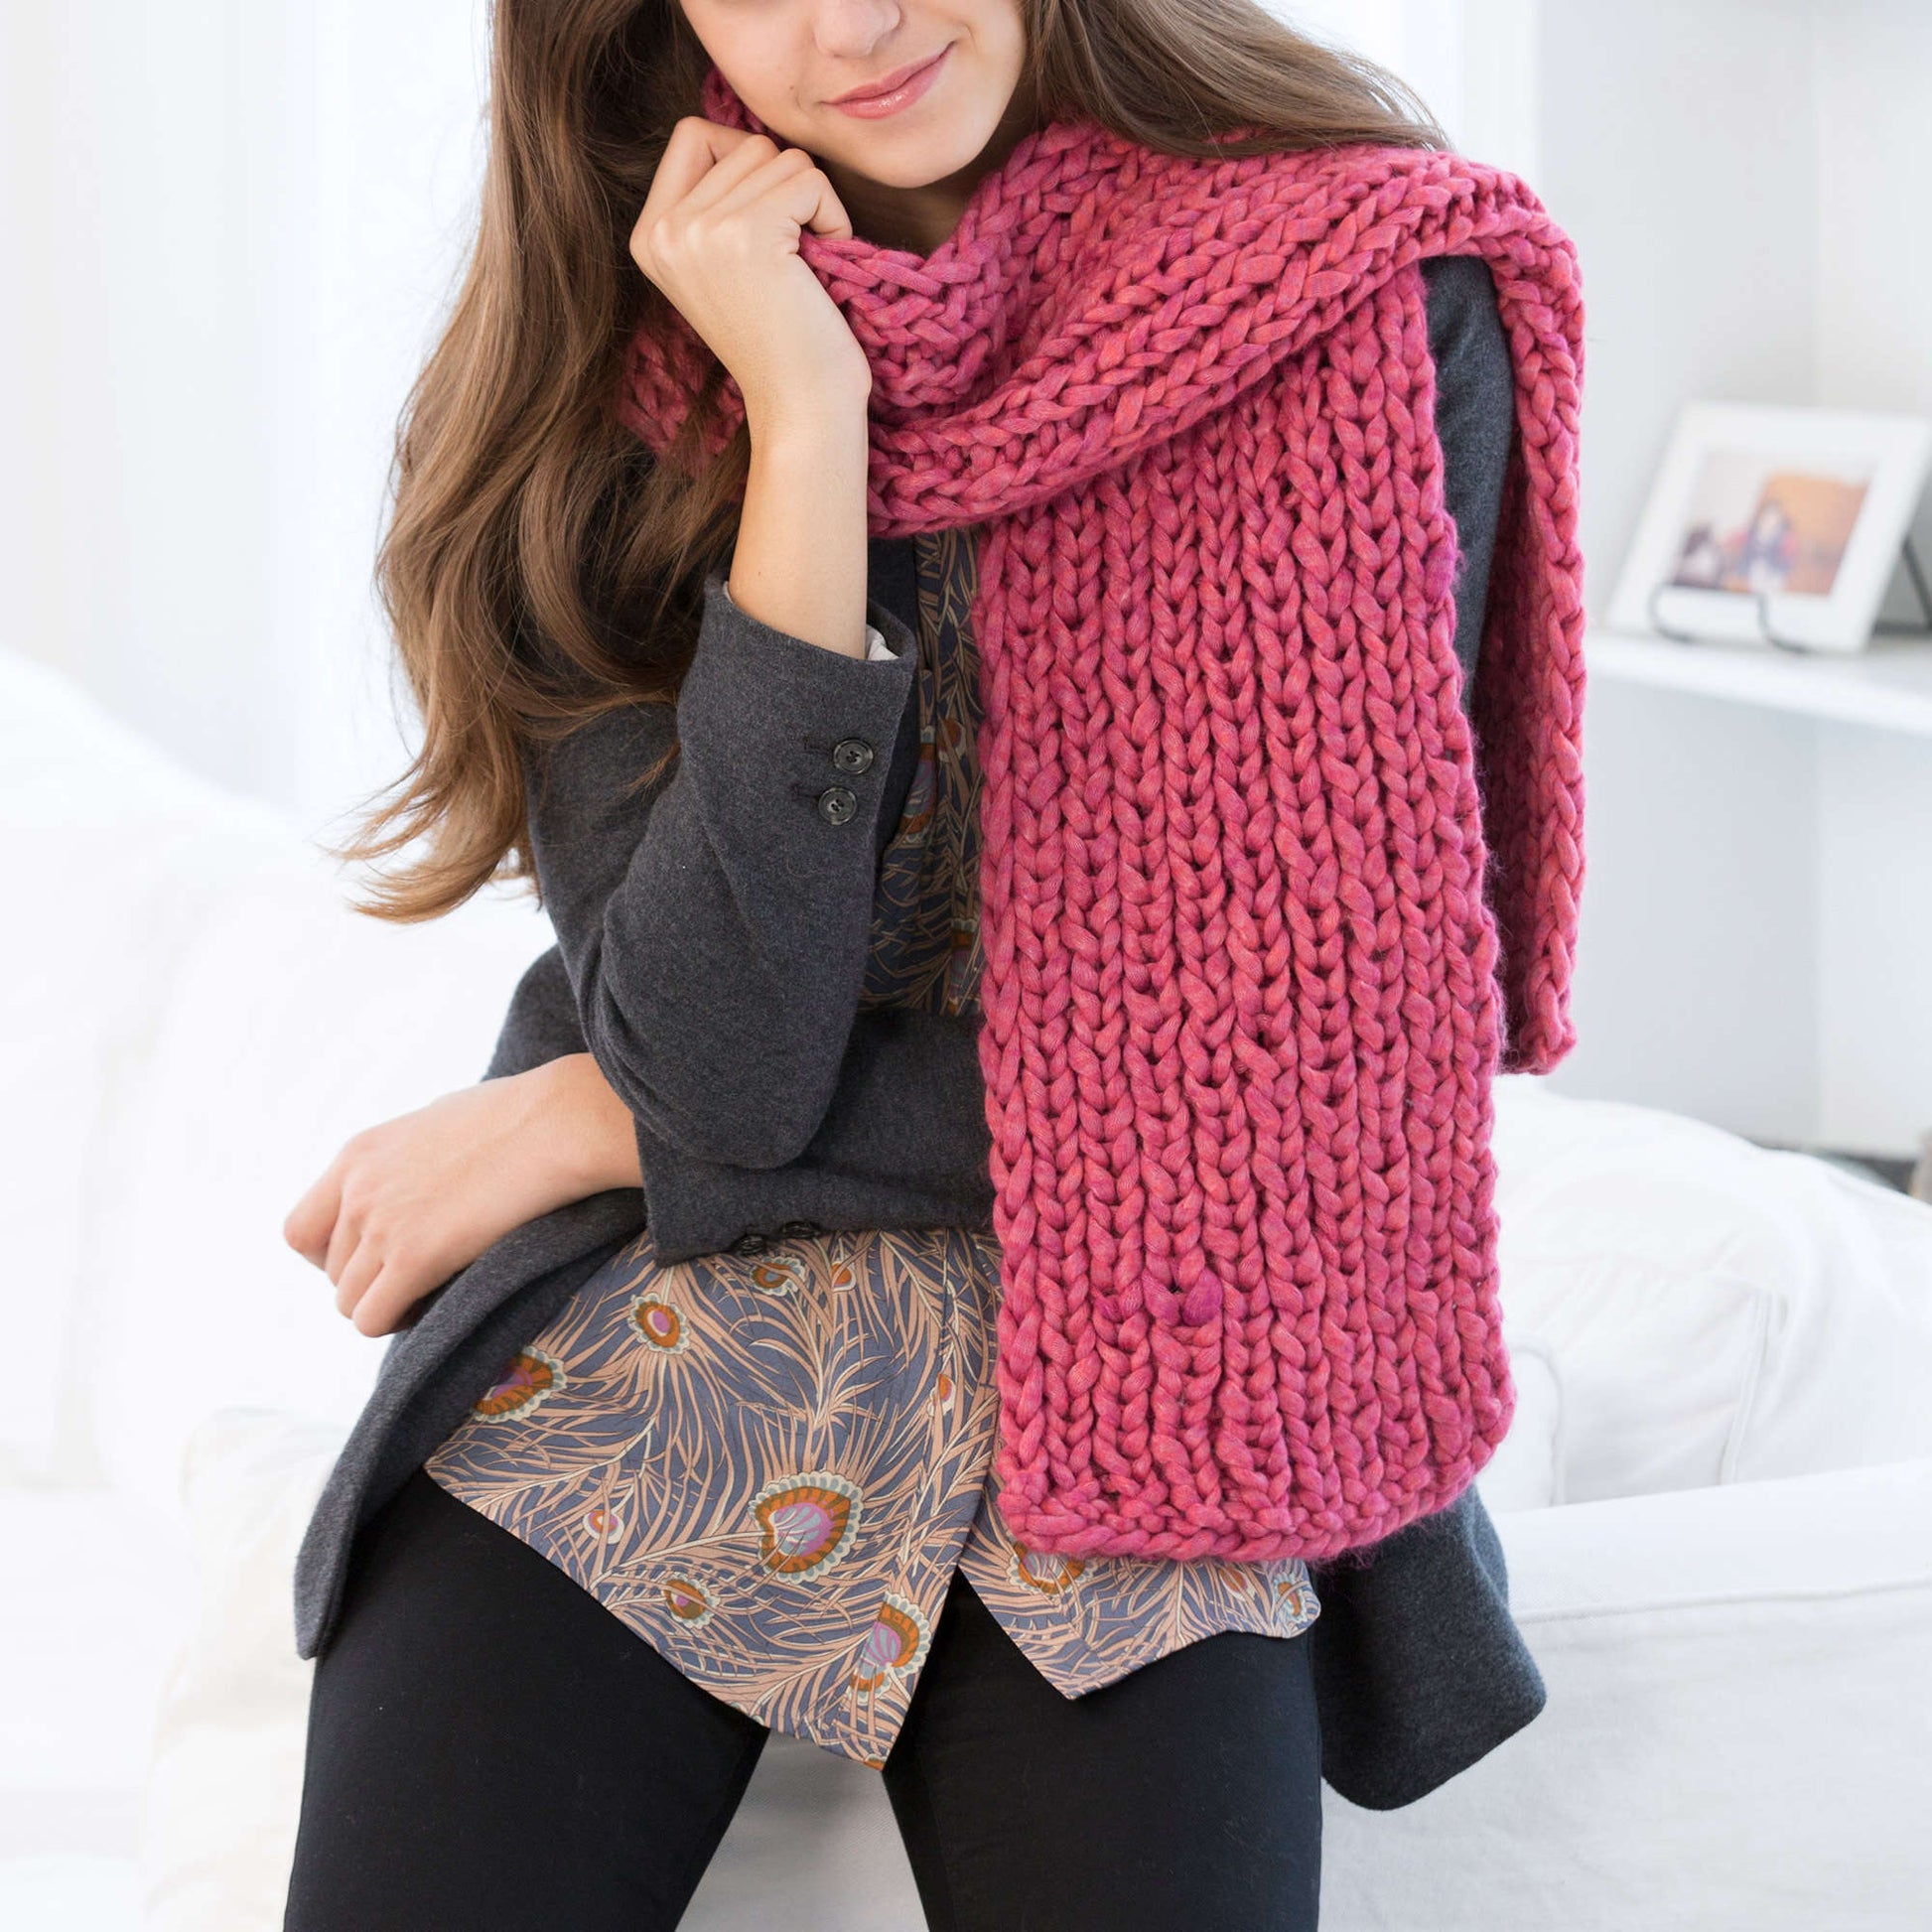 Free Red Heart Mondo Ribbed Scarf Knit Pattern